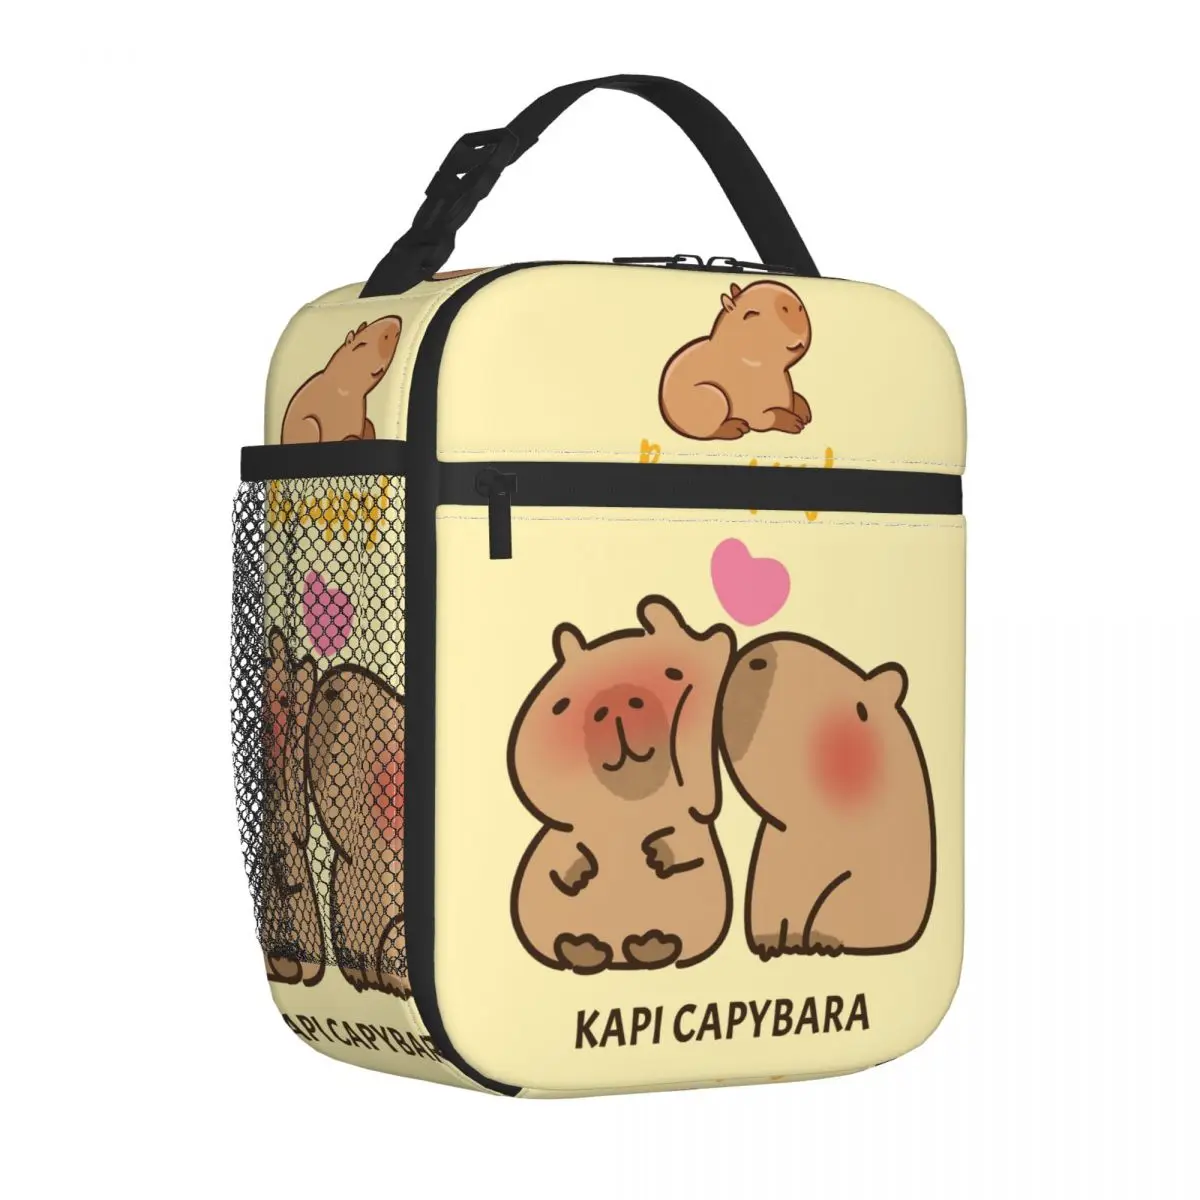 Cute Happy Capybara Product Insulated Lunch Bag for Kids School Storage Food Box Portable Unique Design Cooler Thermal Bento Box